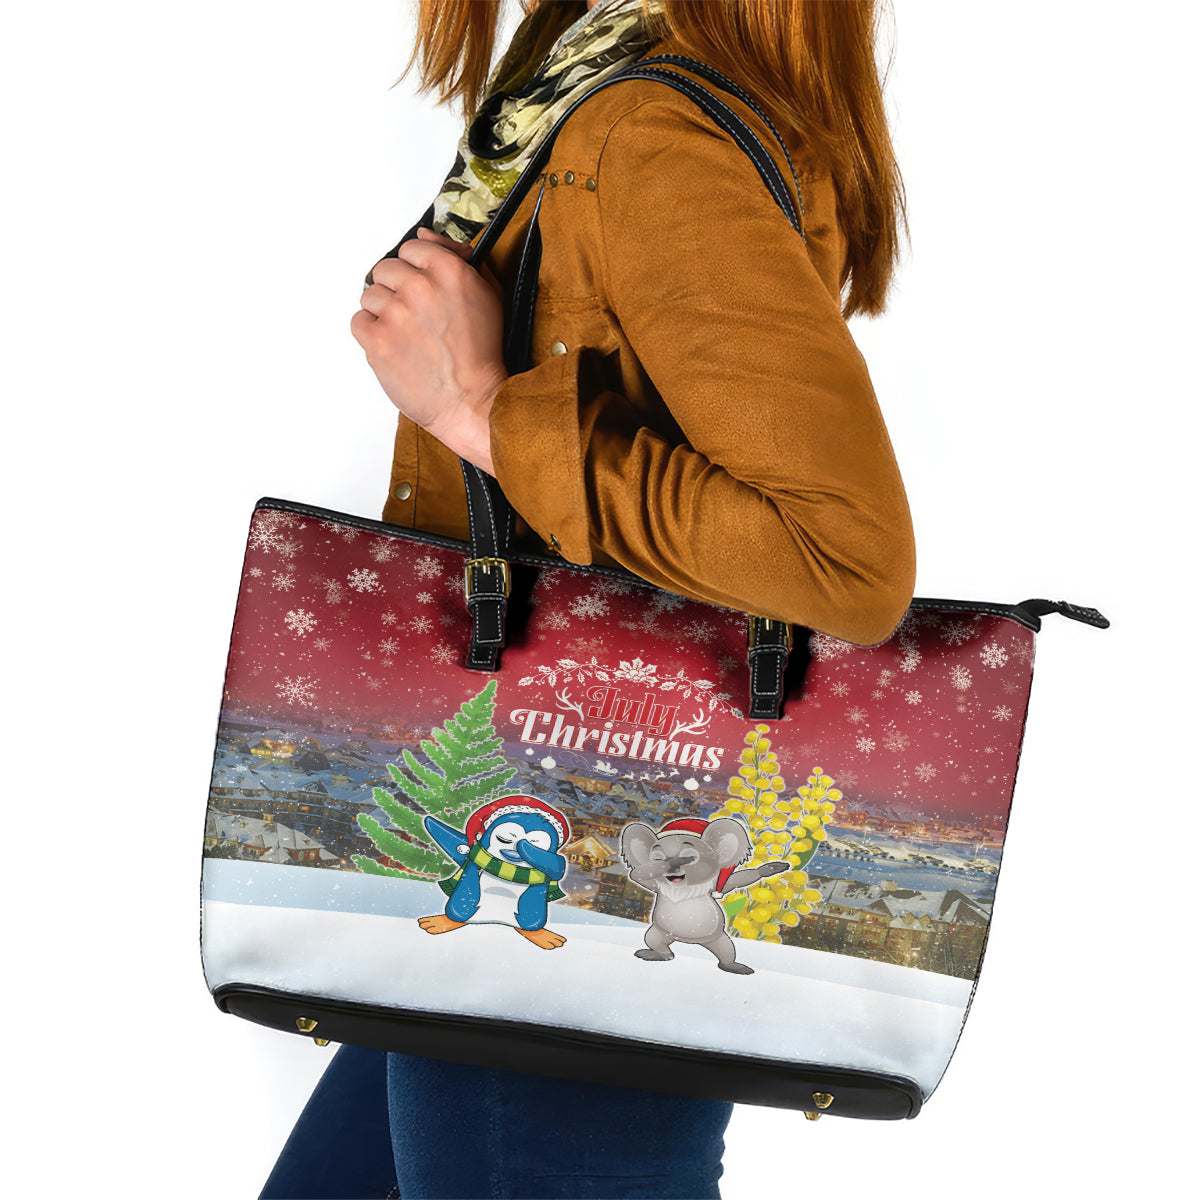 Christmas In July Leather Tote Bag Funny Dabbing Dance Koala And Blue Penguins